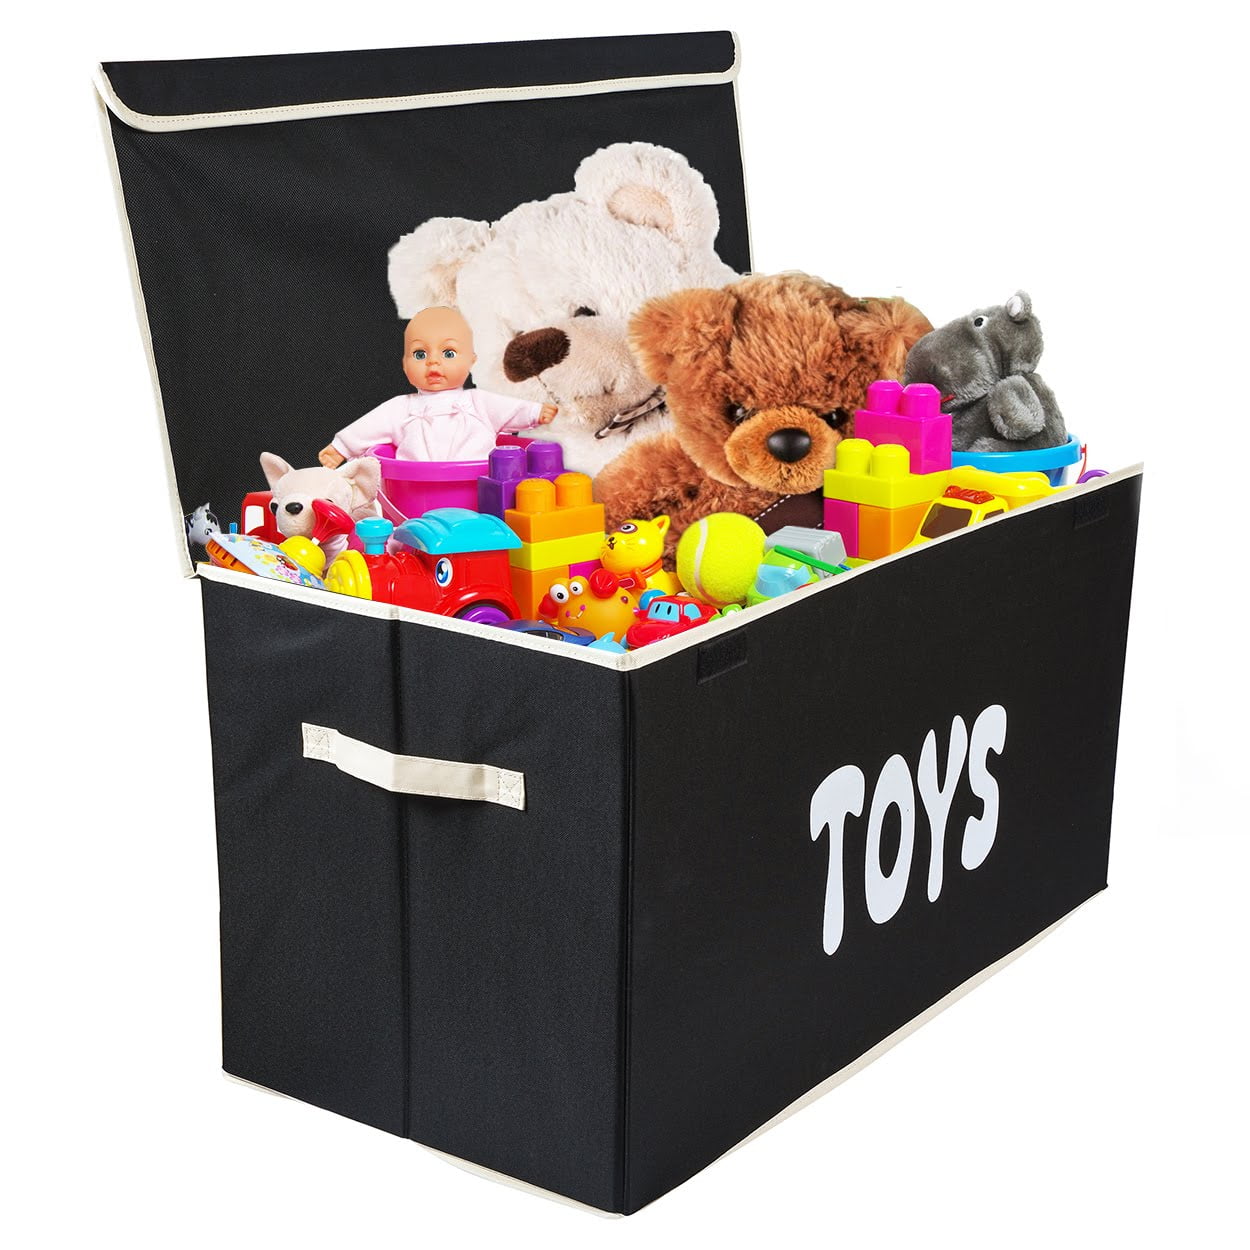 Large Padded Toy Storage Trunk Organiser Box For Kids Wooden Chest Seat Folding 